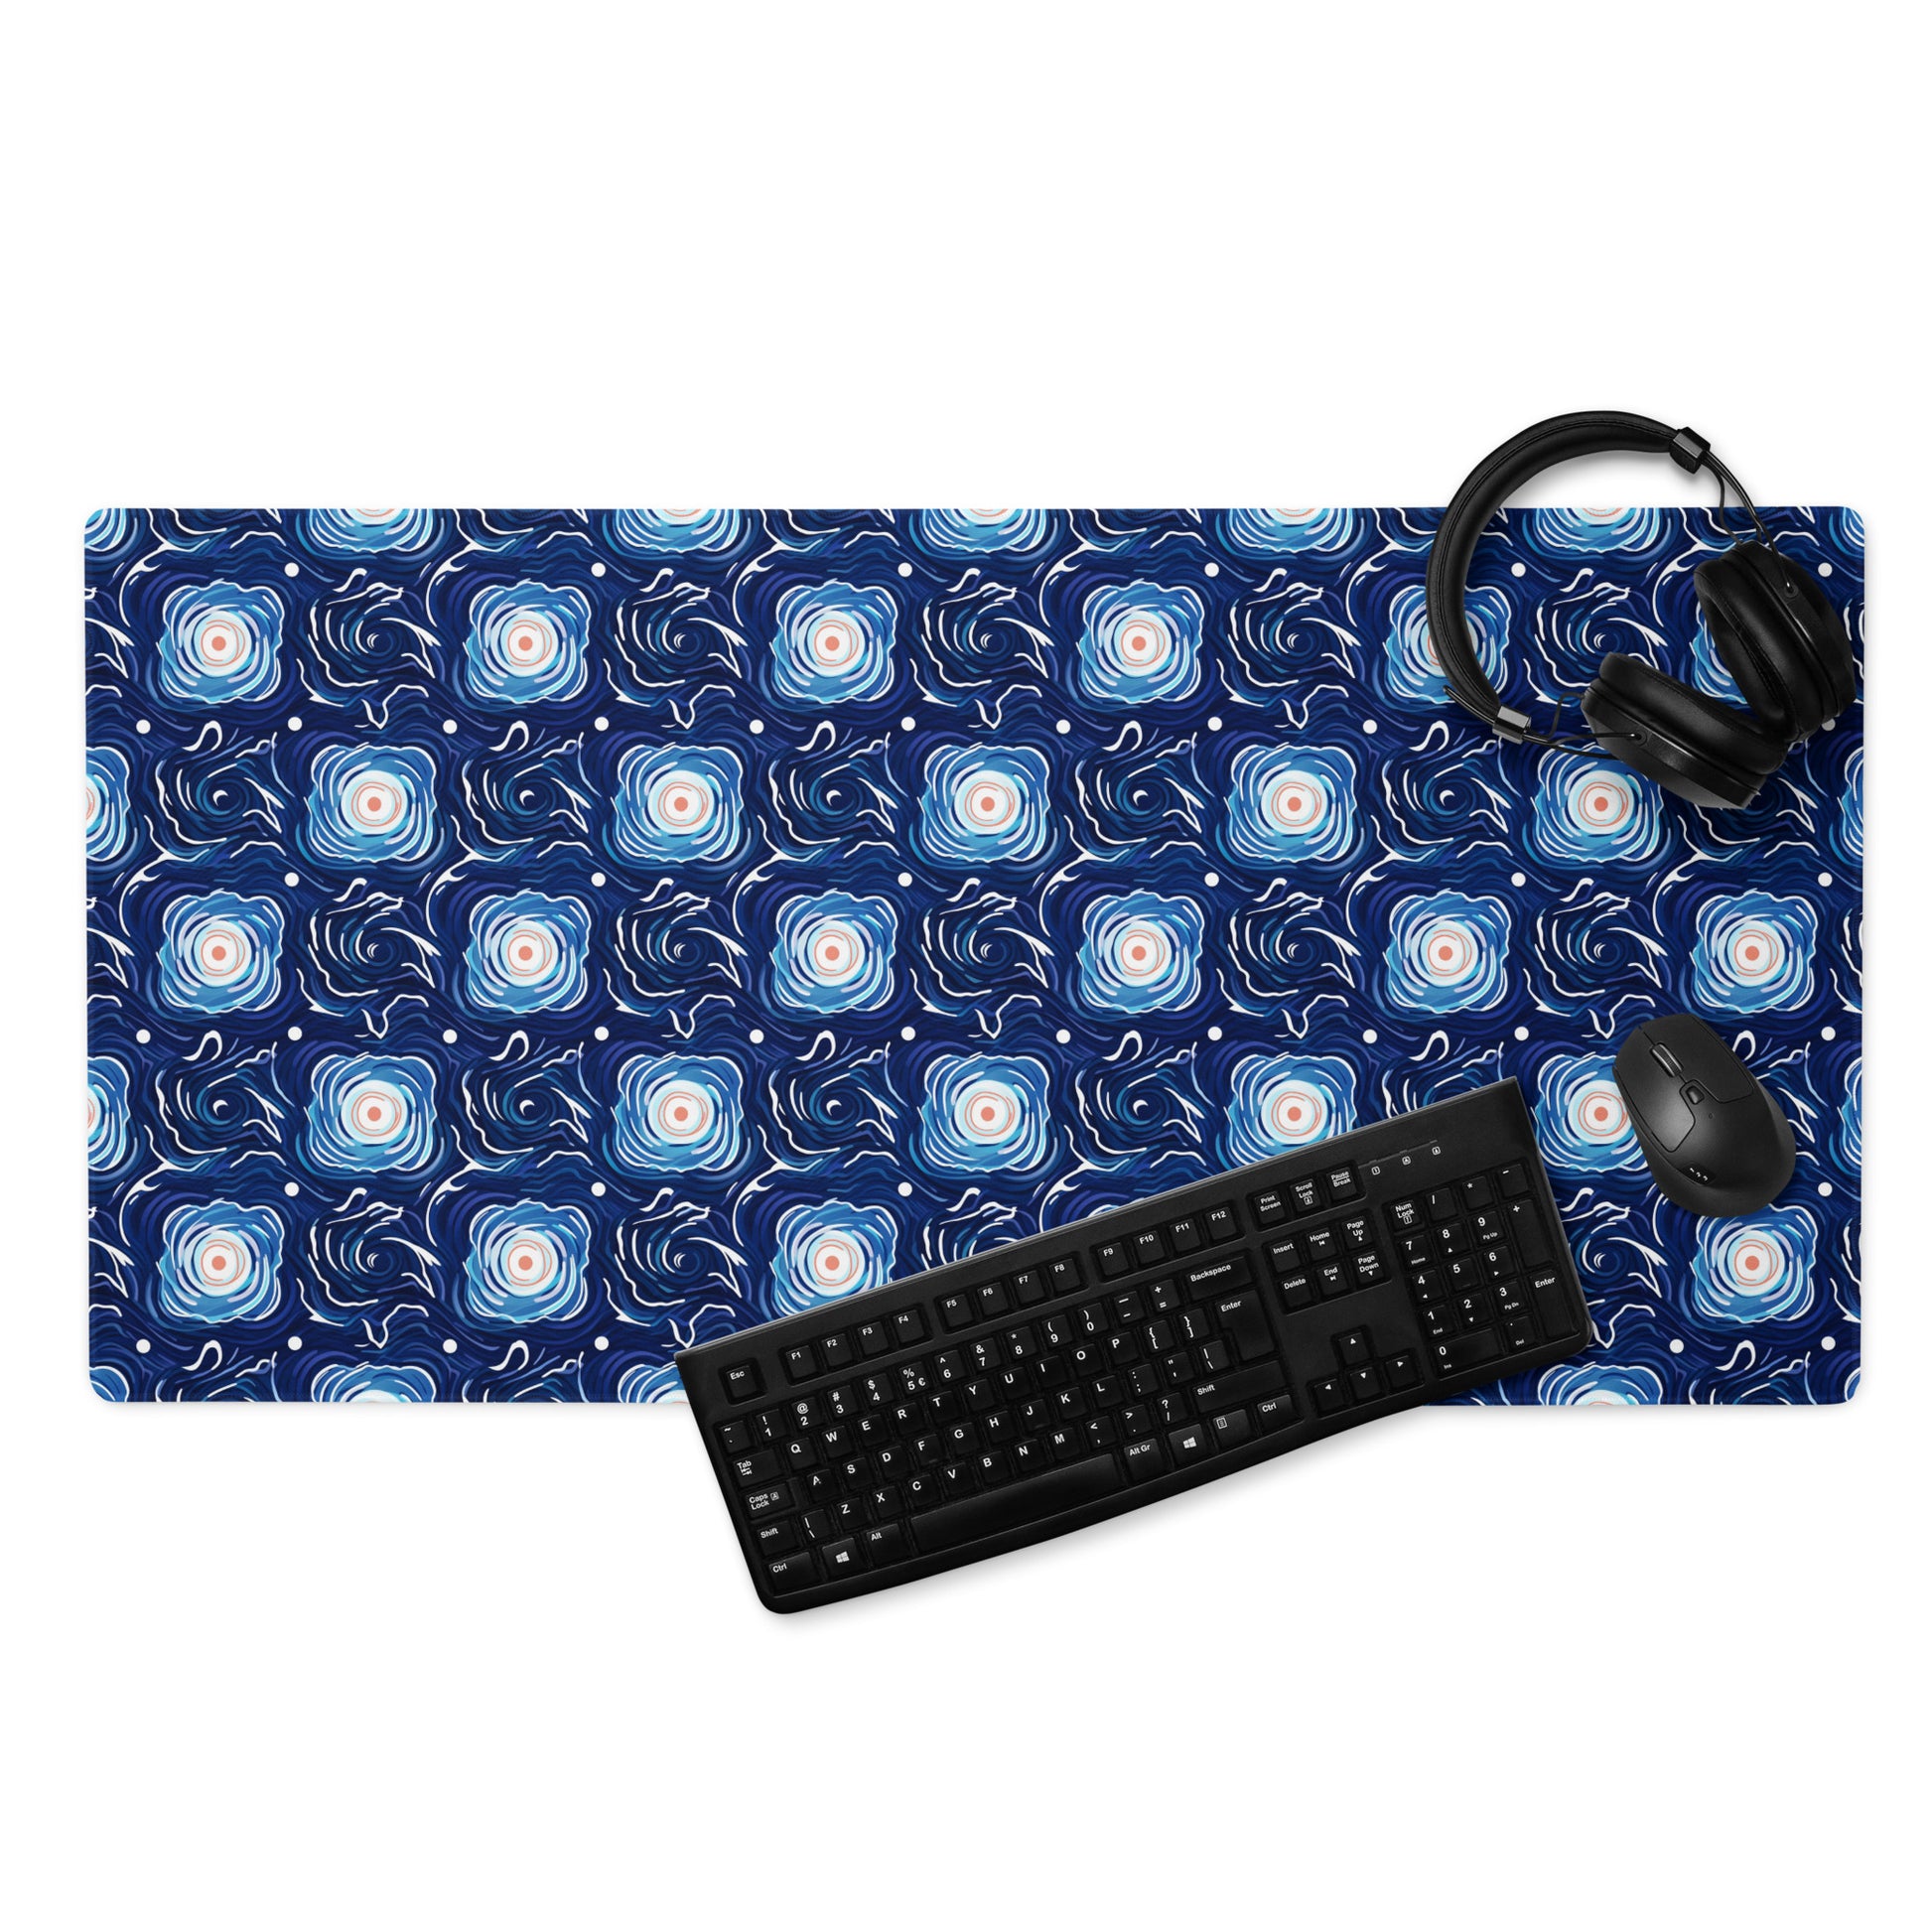 A 36" x 18" desk pad with a blue and white floral pattern. With a keyboard, mouse and, headphones sitting on it.